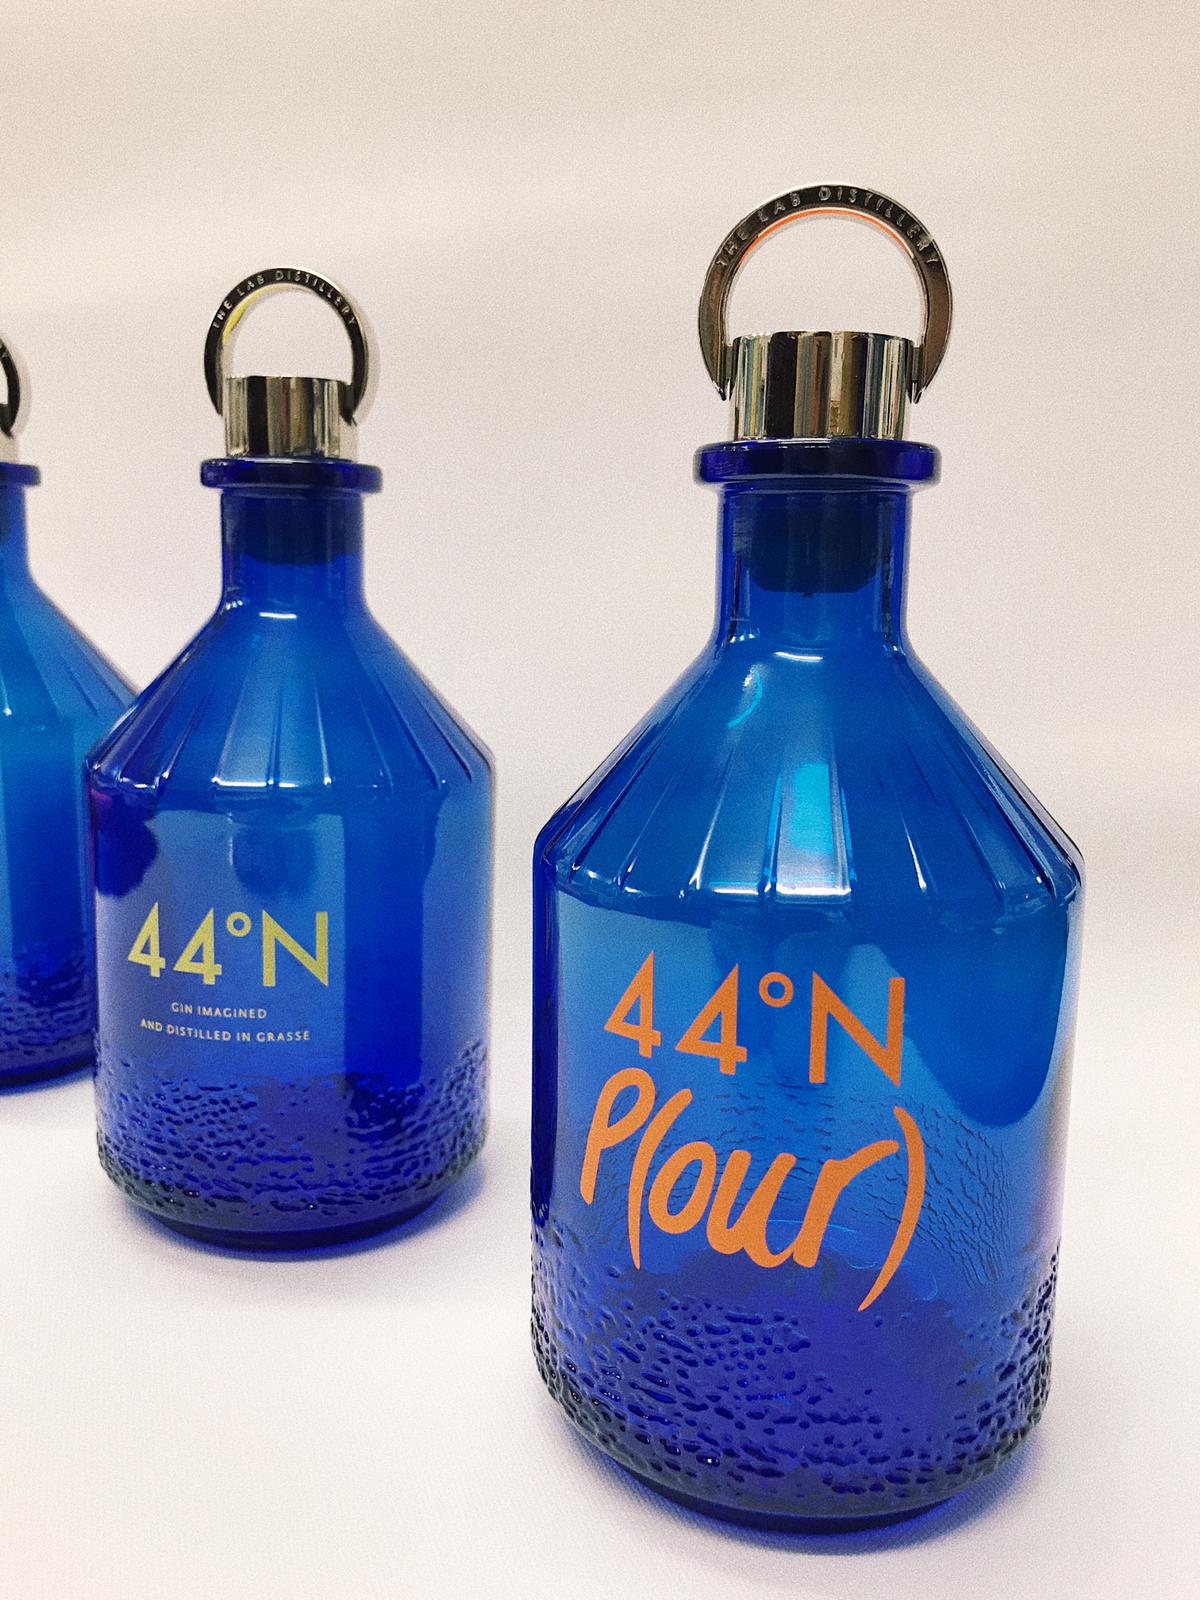 Orange and Yellow Contour Cut Logo Decals onto Blue Glass Bottles